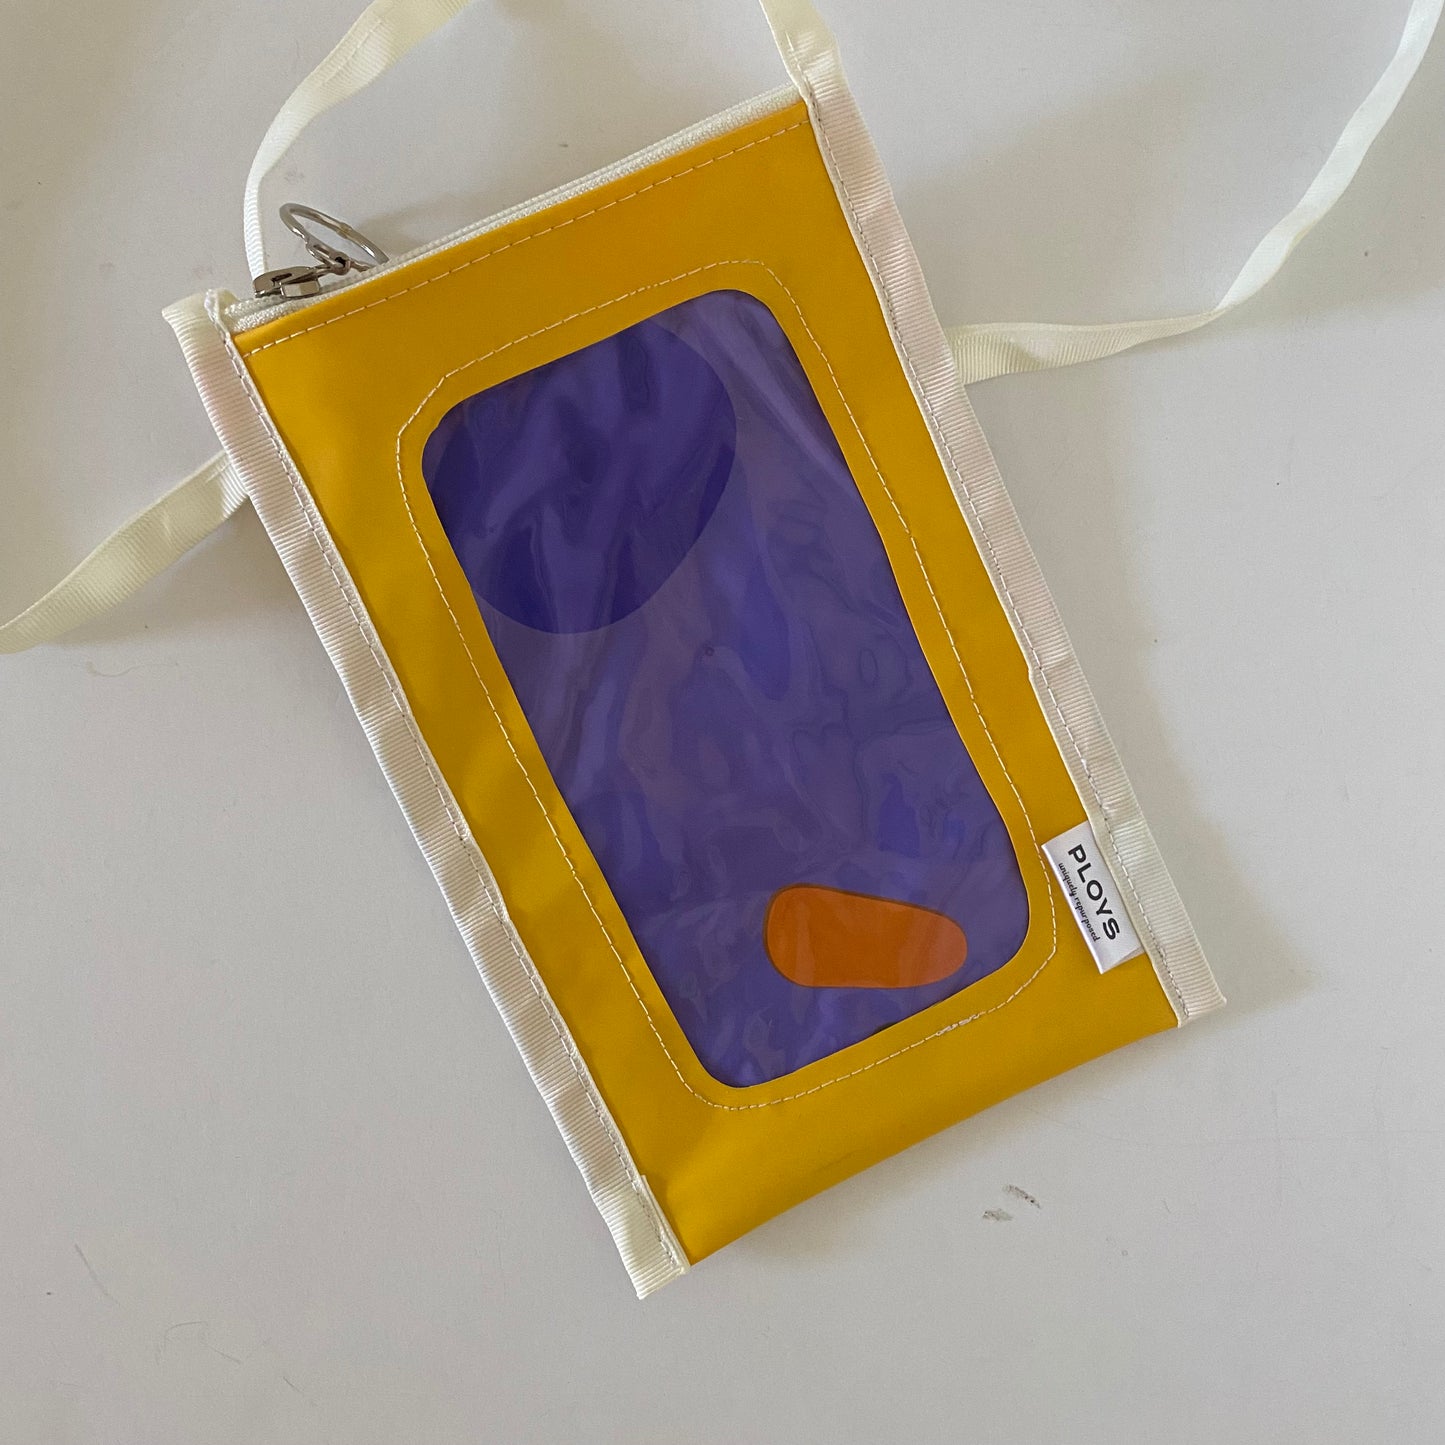 Recycled Mobile Phone Touch Screen Purses - ex inflatables - variety of colours